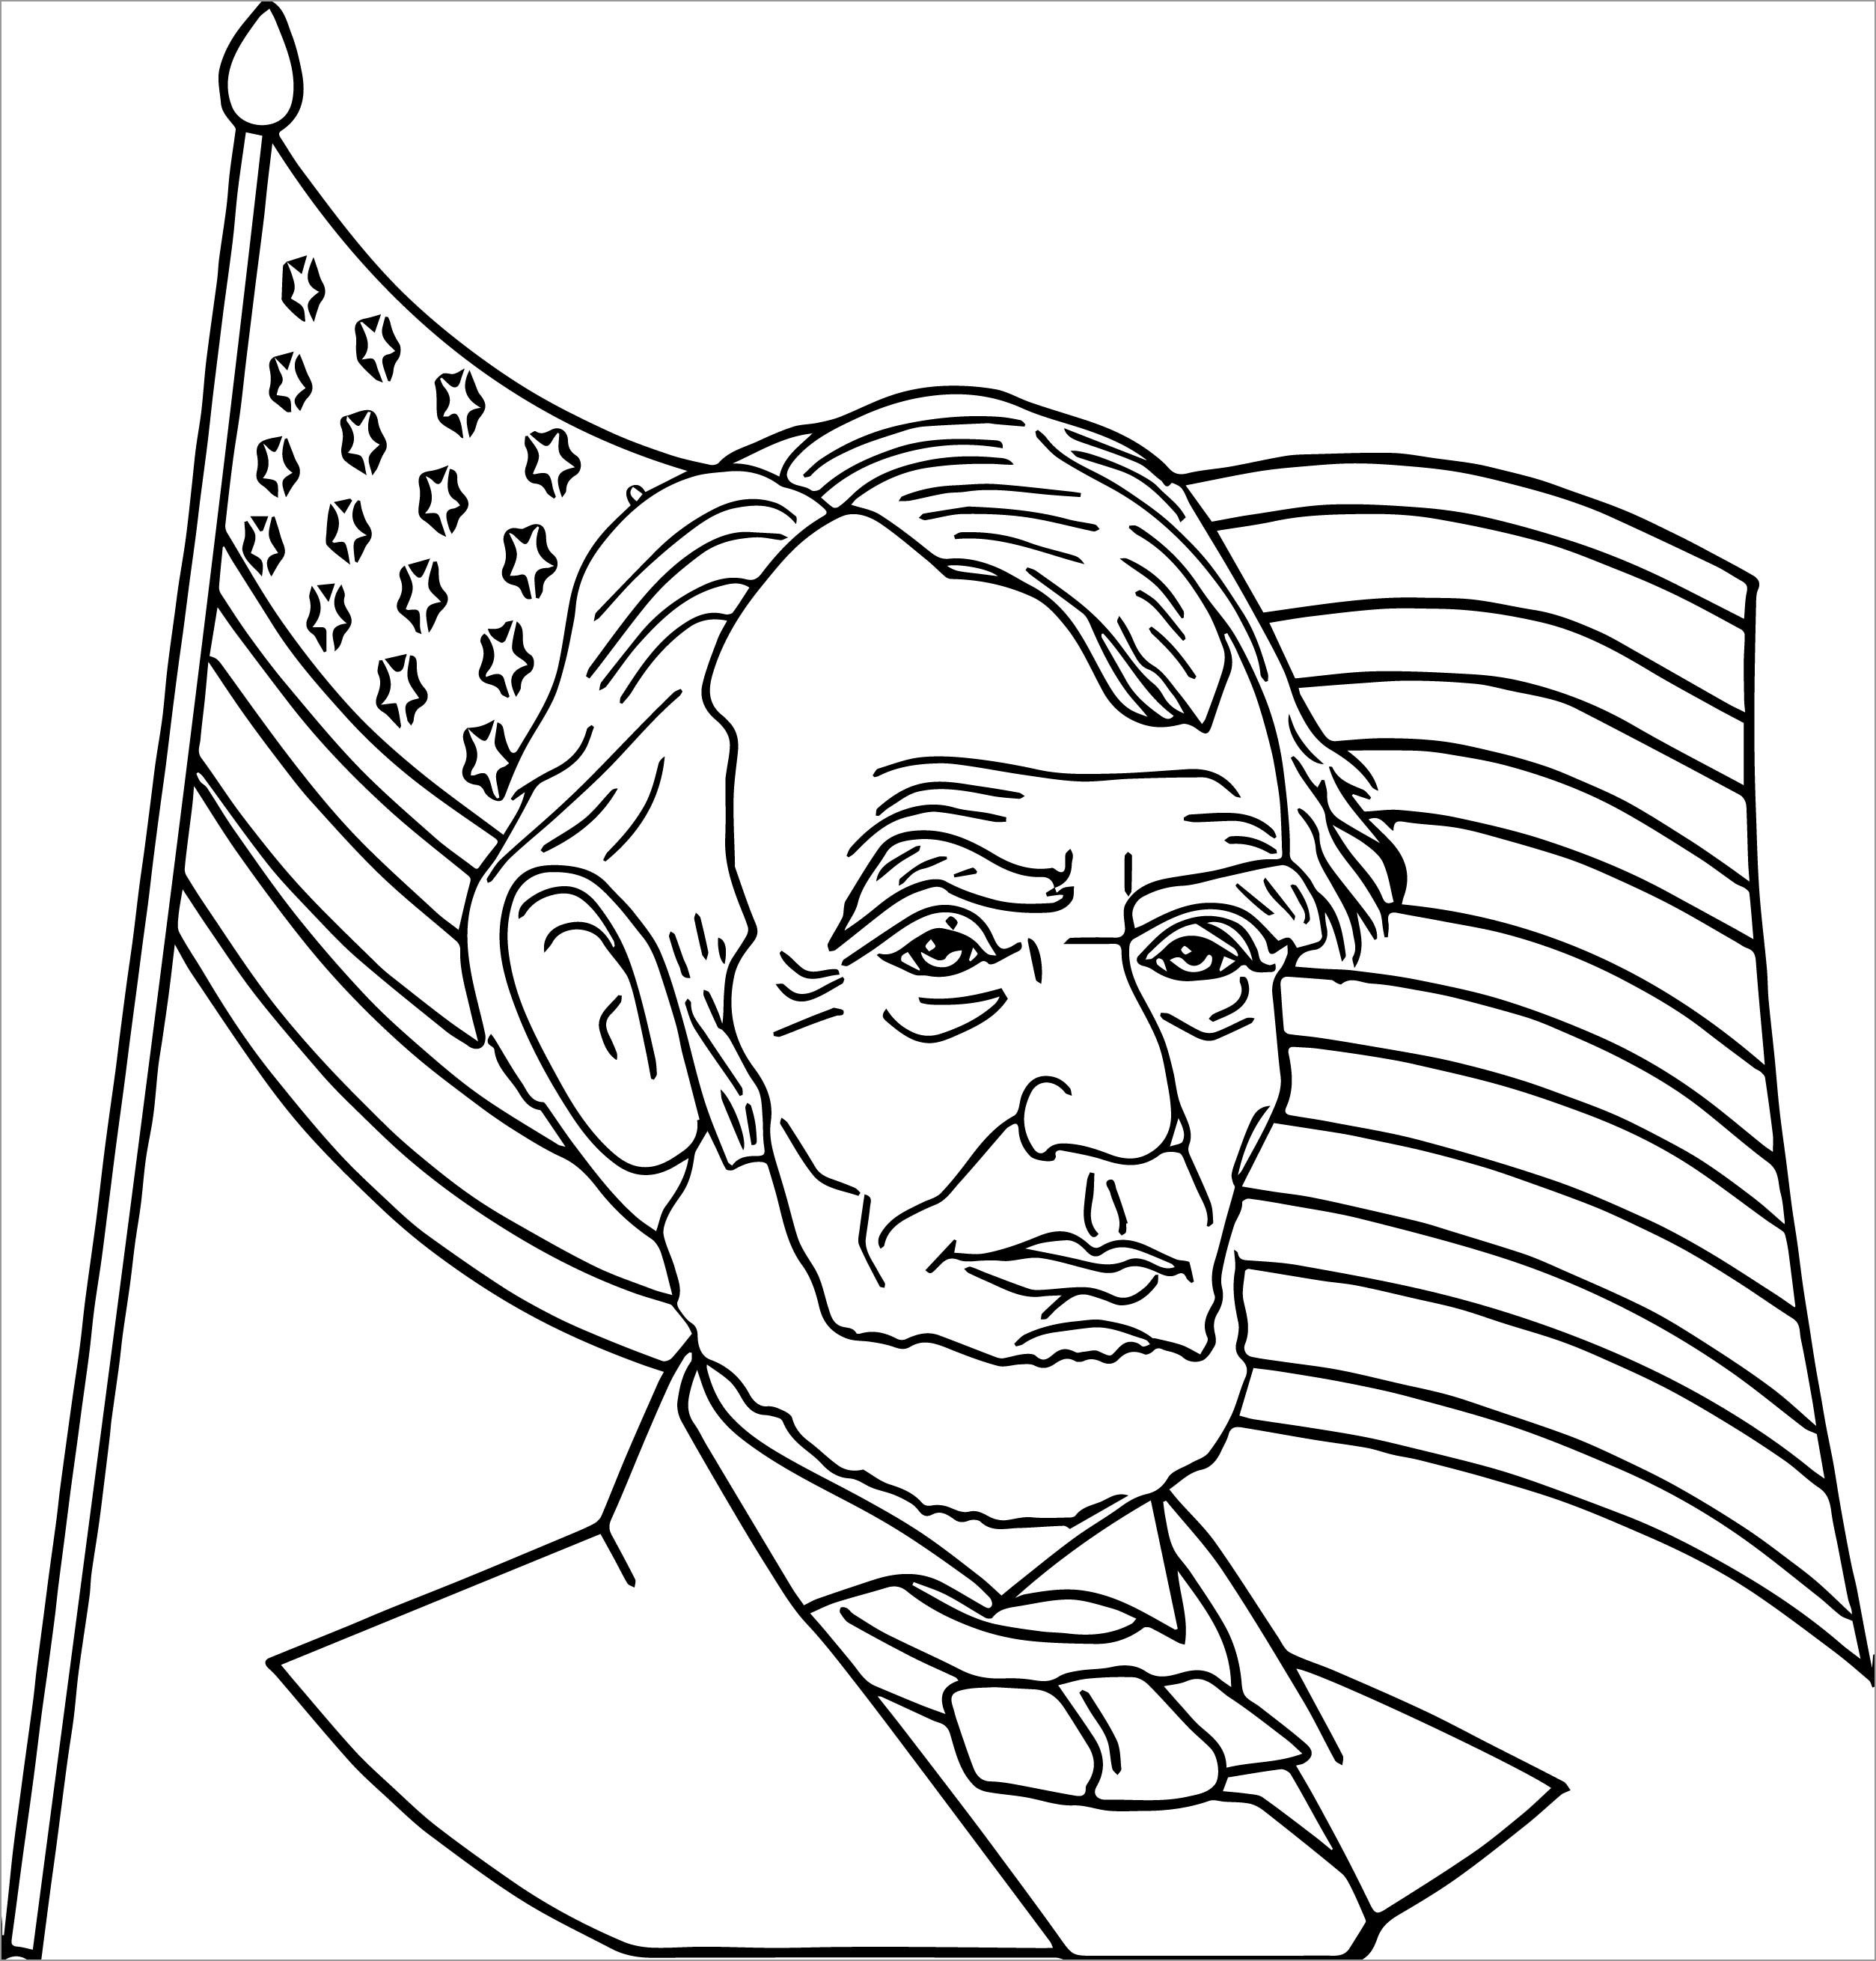 Abraham Lincoln Coloring Pages   ColoringBay